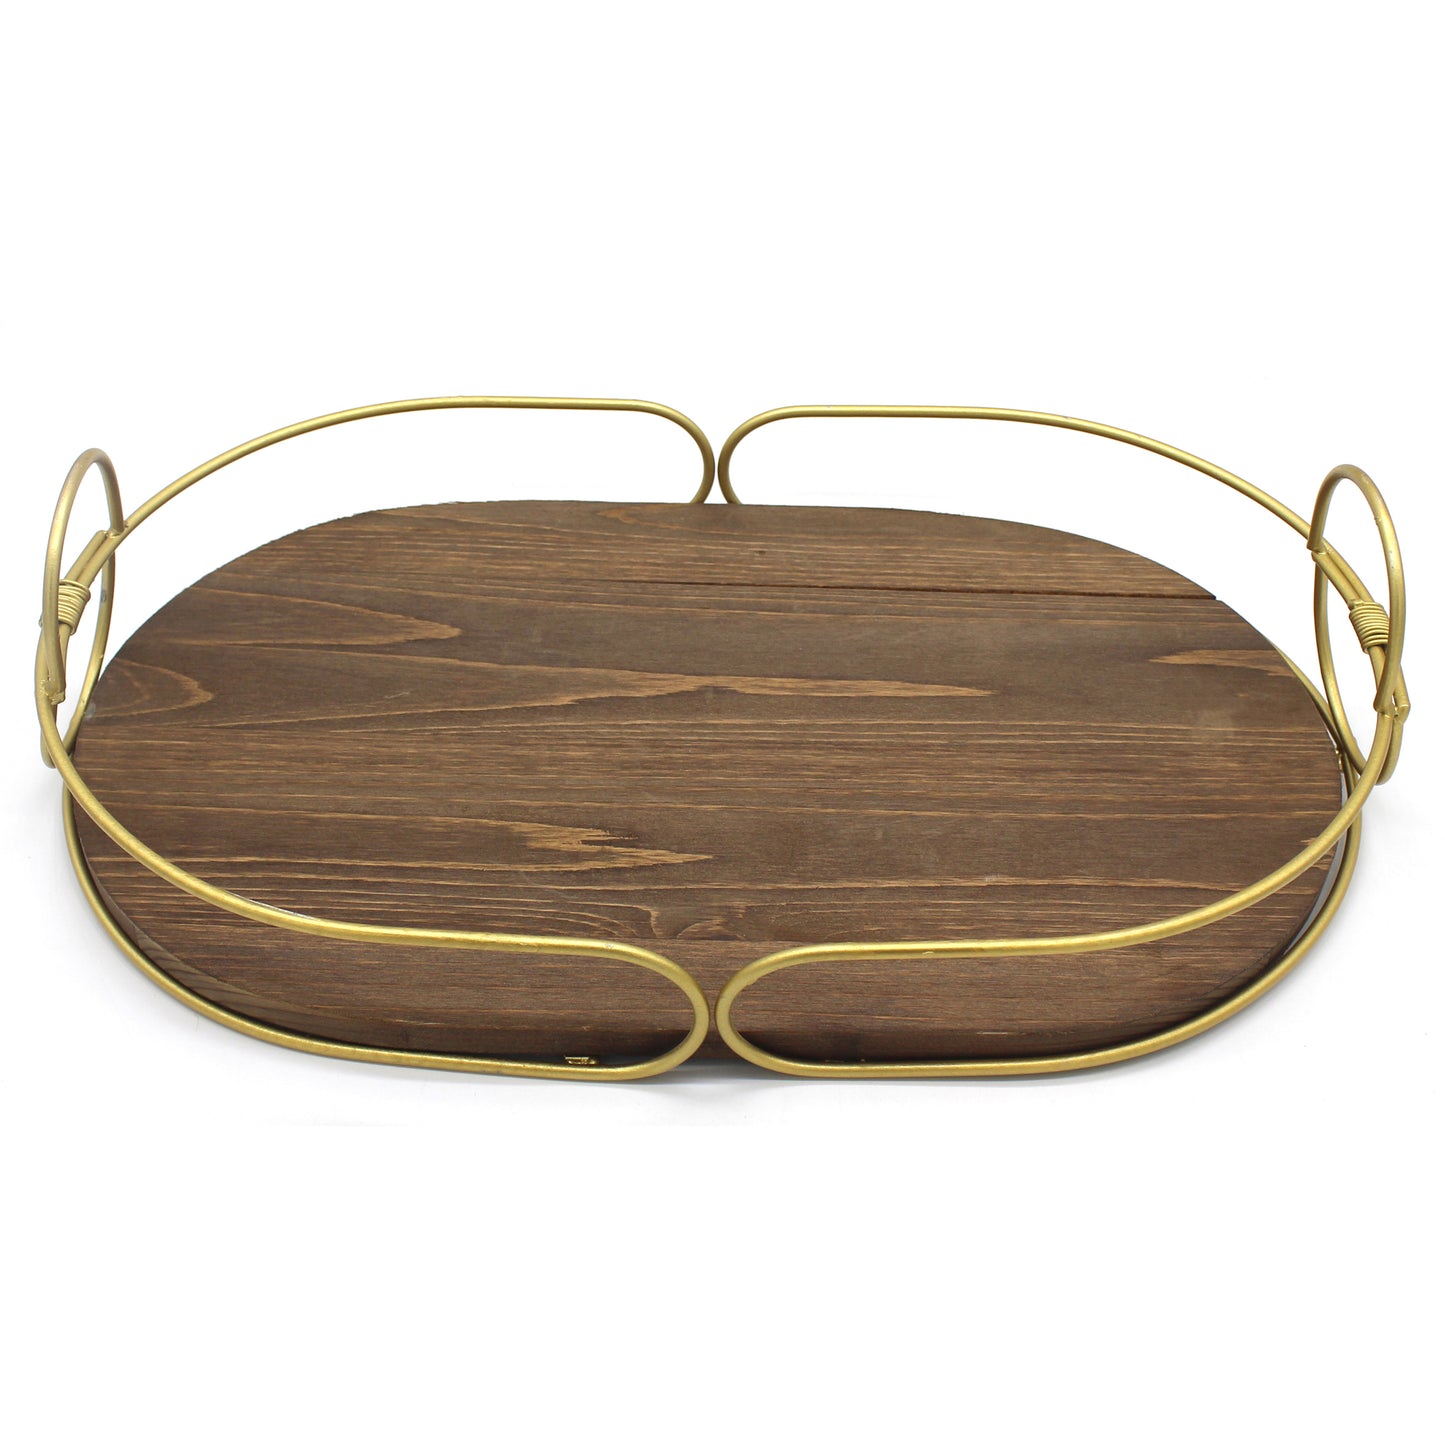 CVHOMEDECO. Decorative Tray with Golden Handle Oval Wood Serving Tray with Metal Handles for Breakfast in Bed, Lunch, Dinner, Appetizers, Kitchen, Ottoman, Coffee Table, BBQ and Party